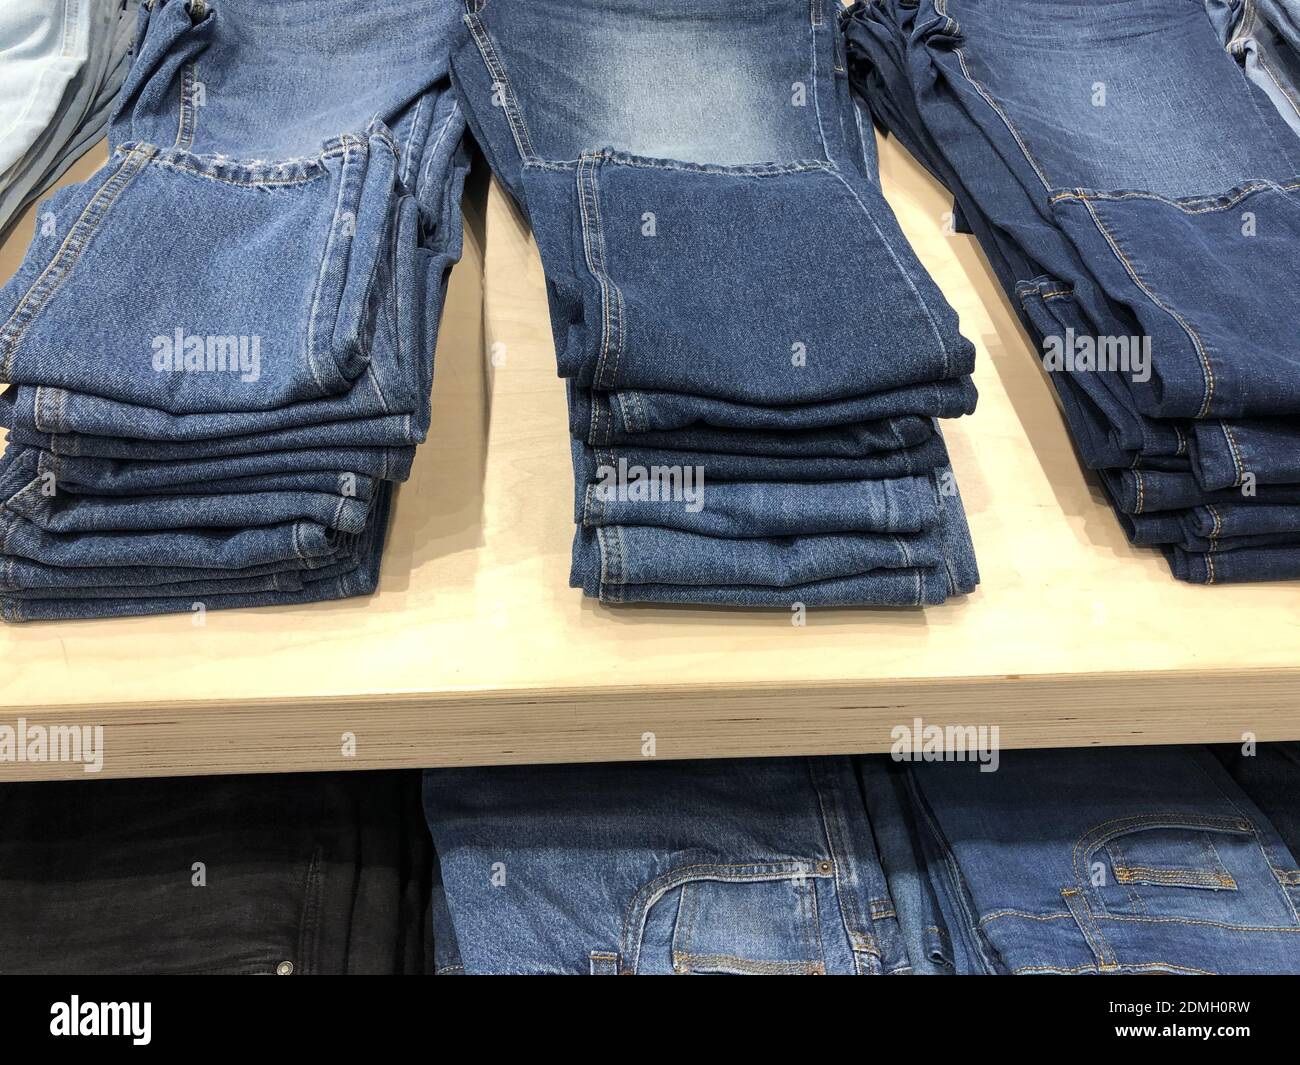 Orlando,FL/USA-9/30/19: A Justice clothing retail store in an indoor mall.  Tween Brands, Inc. (formerly Limited Too and Too) operates Justice branded  Stock Photo - Alamy